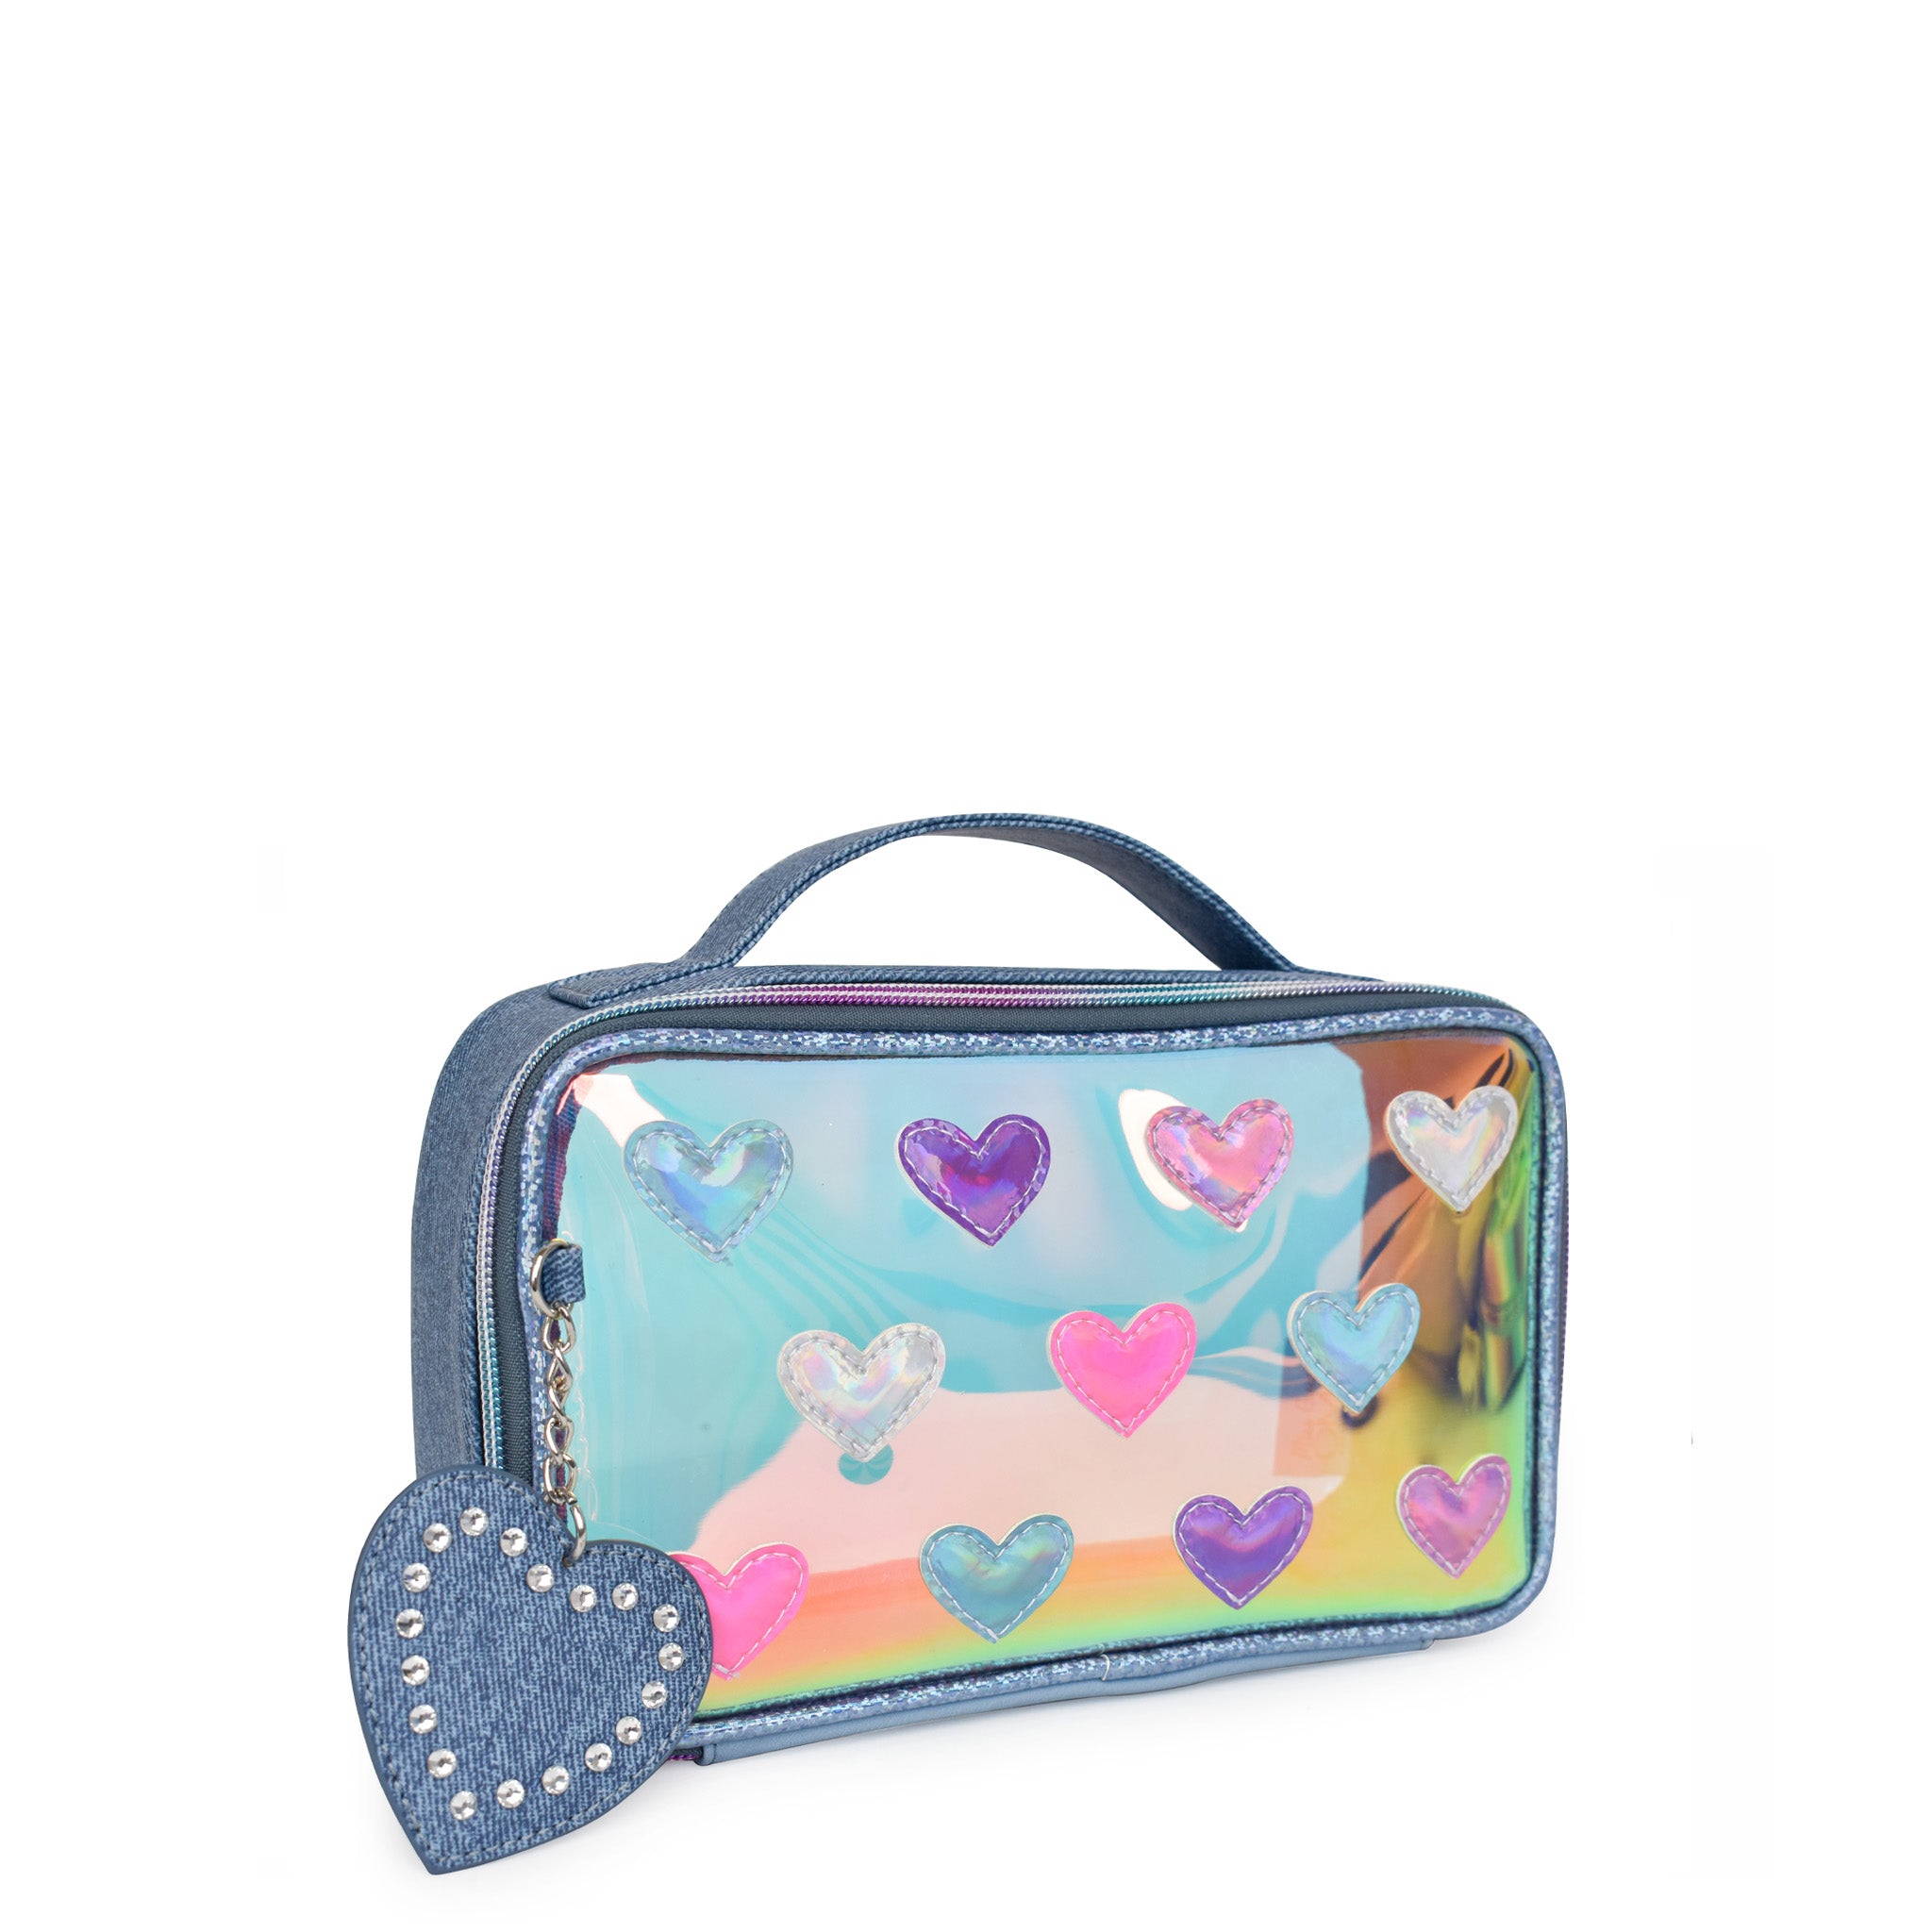 Side view of clear glazed top-handle pouch with denim rhinestone heart-shaped keychain